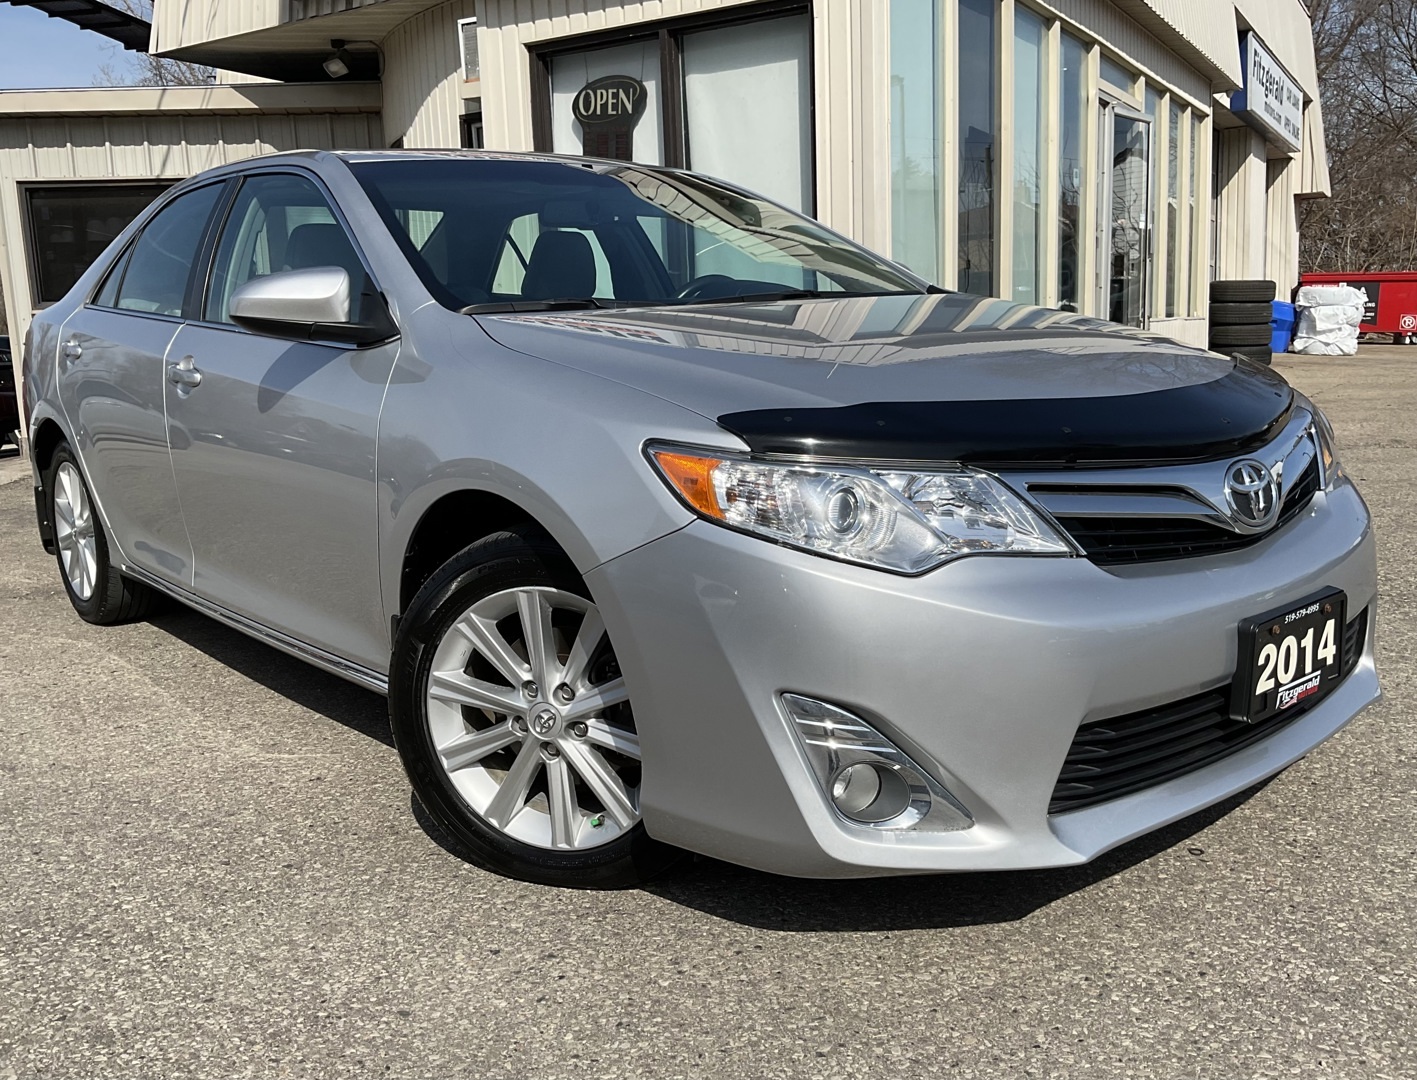 2014 Toyota Camry XLE - LEATHER! NAV! BACK-UP CAM! BSM! SUNROOF!